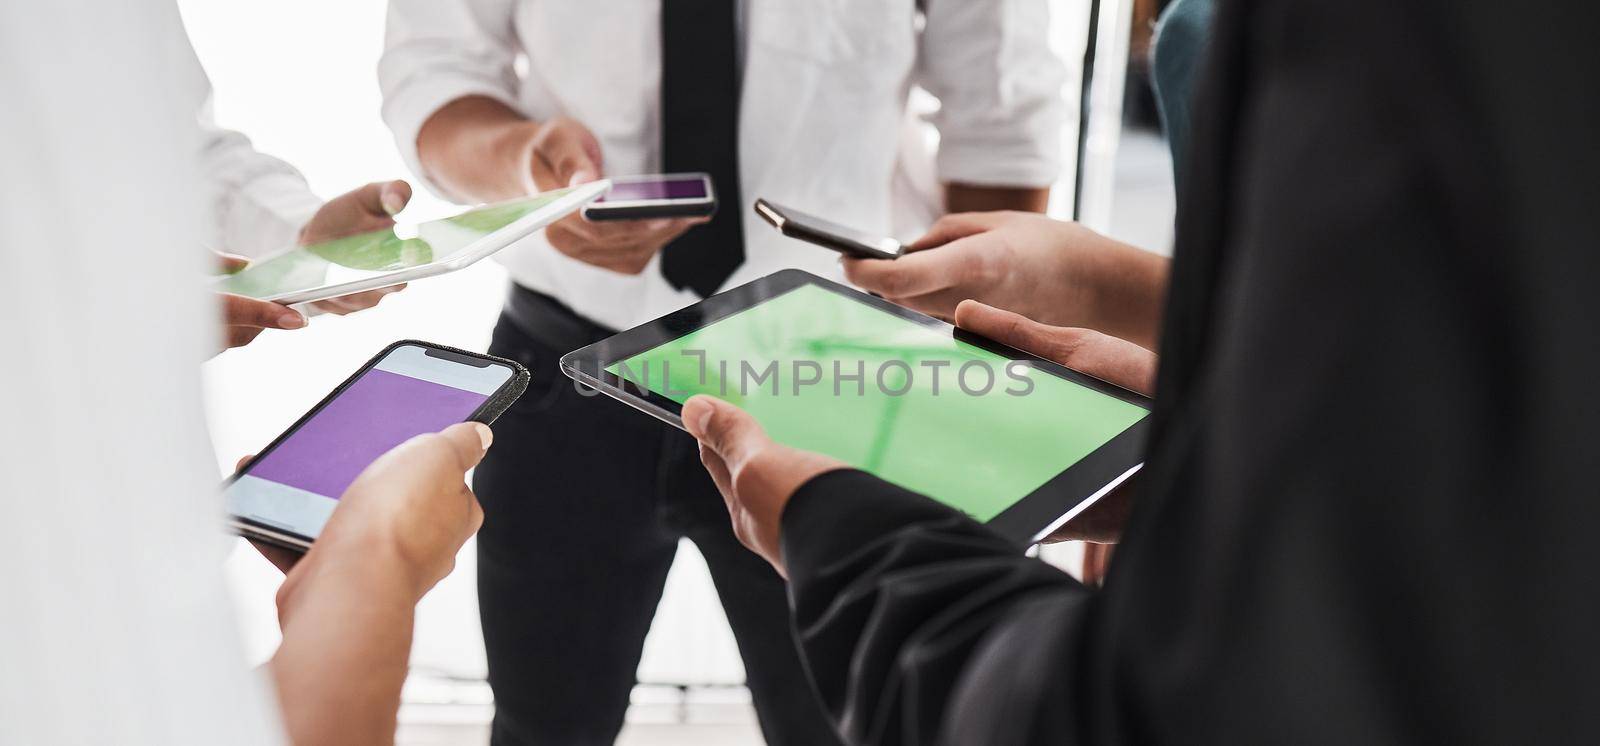 Linking up to get more done. Closeup shot of a group of unrecognisable businesspeople using digital devices together in an office. by YuriArcurs